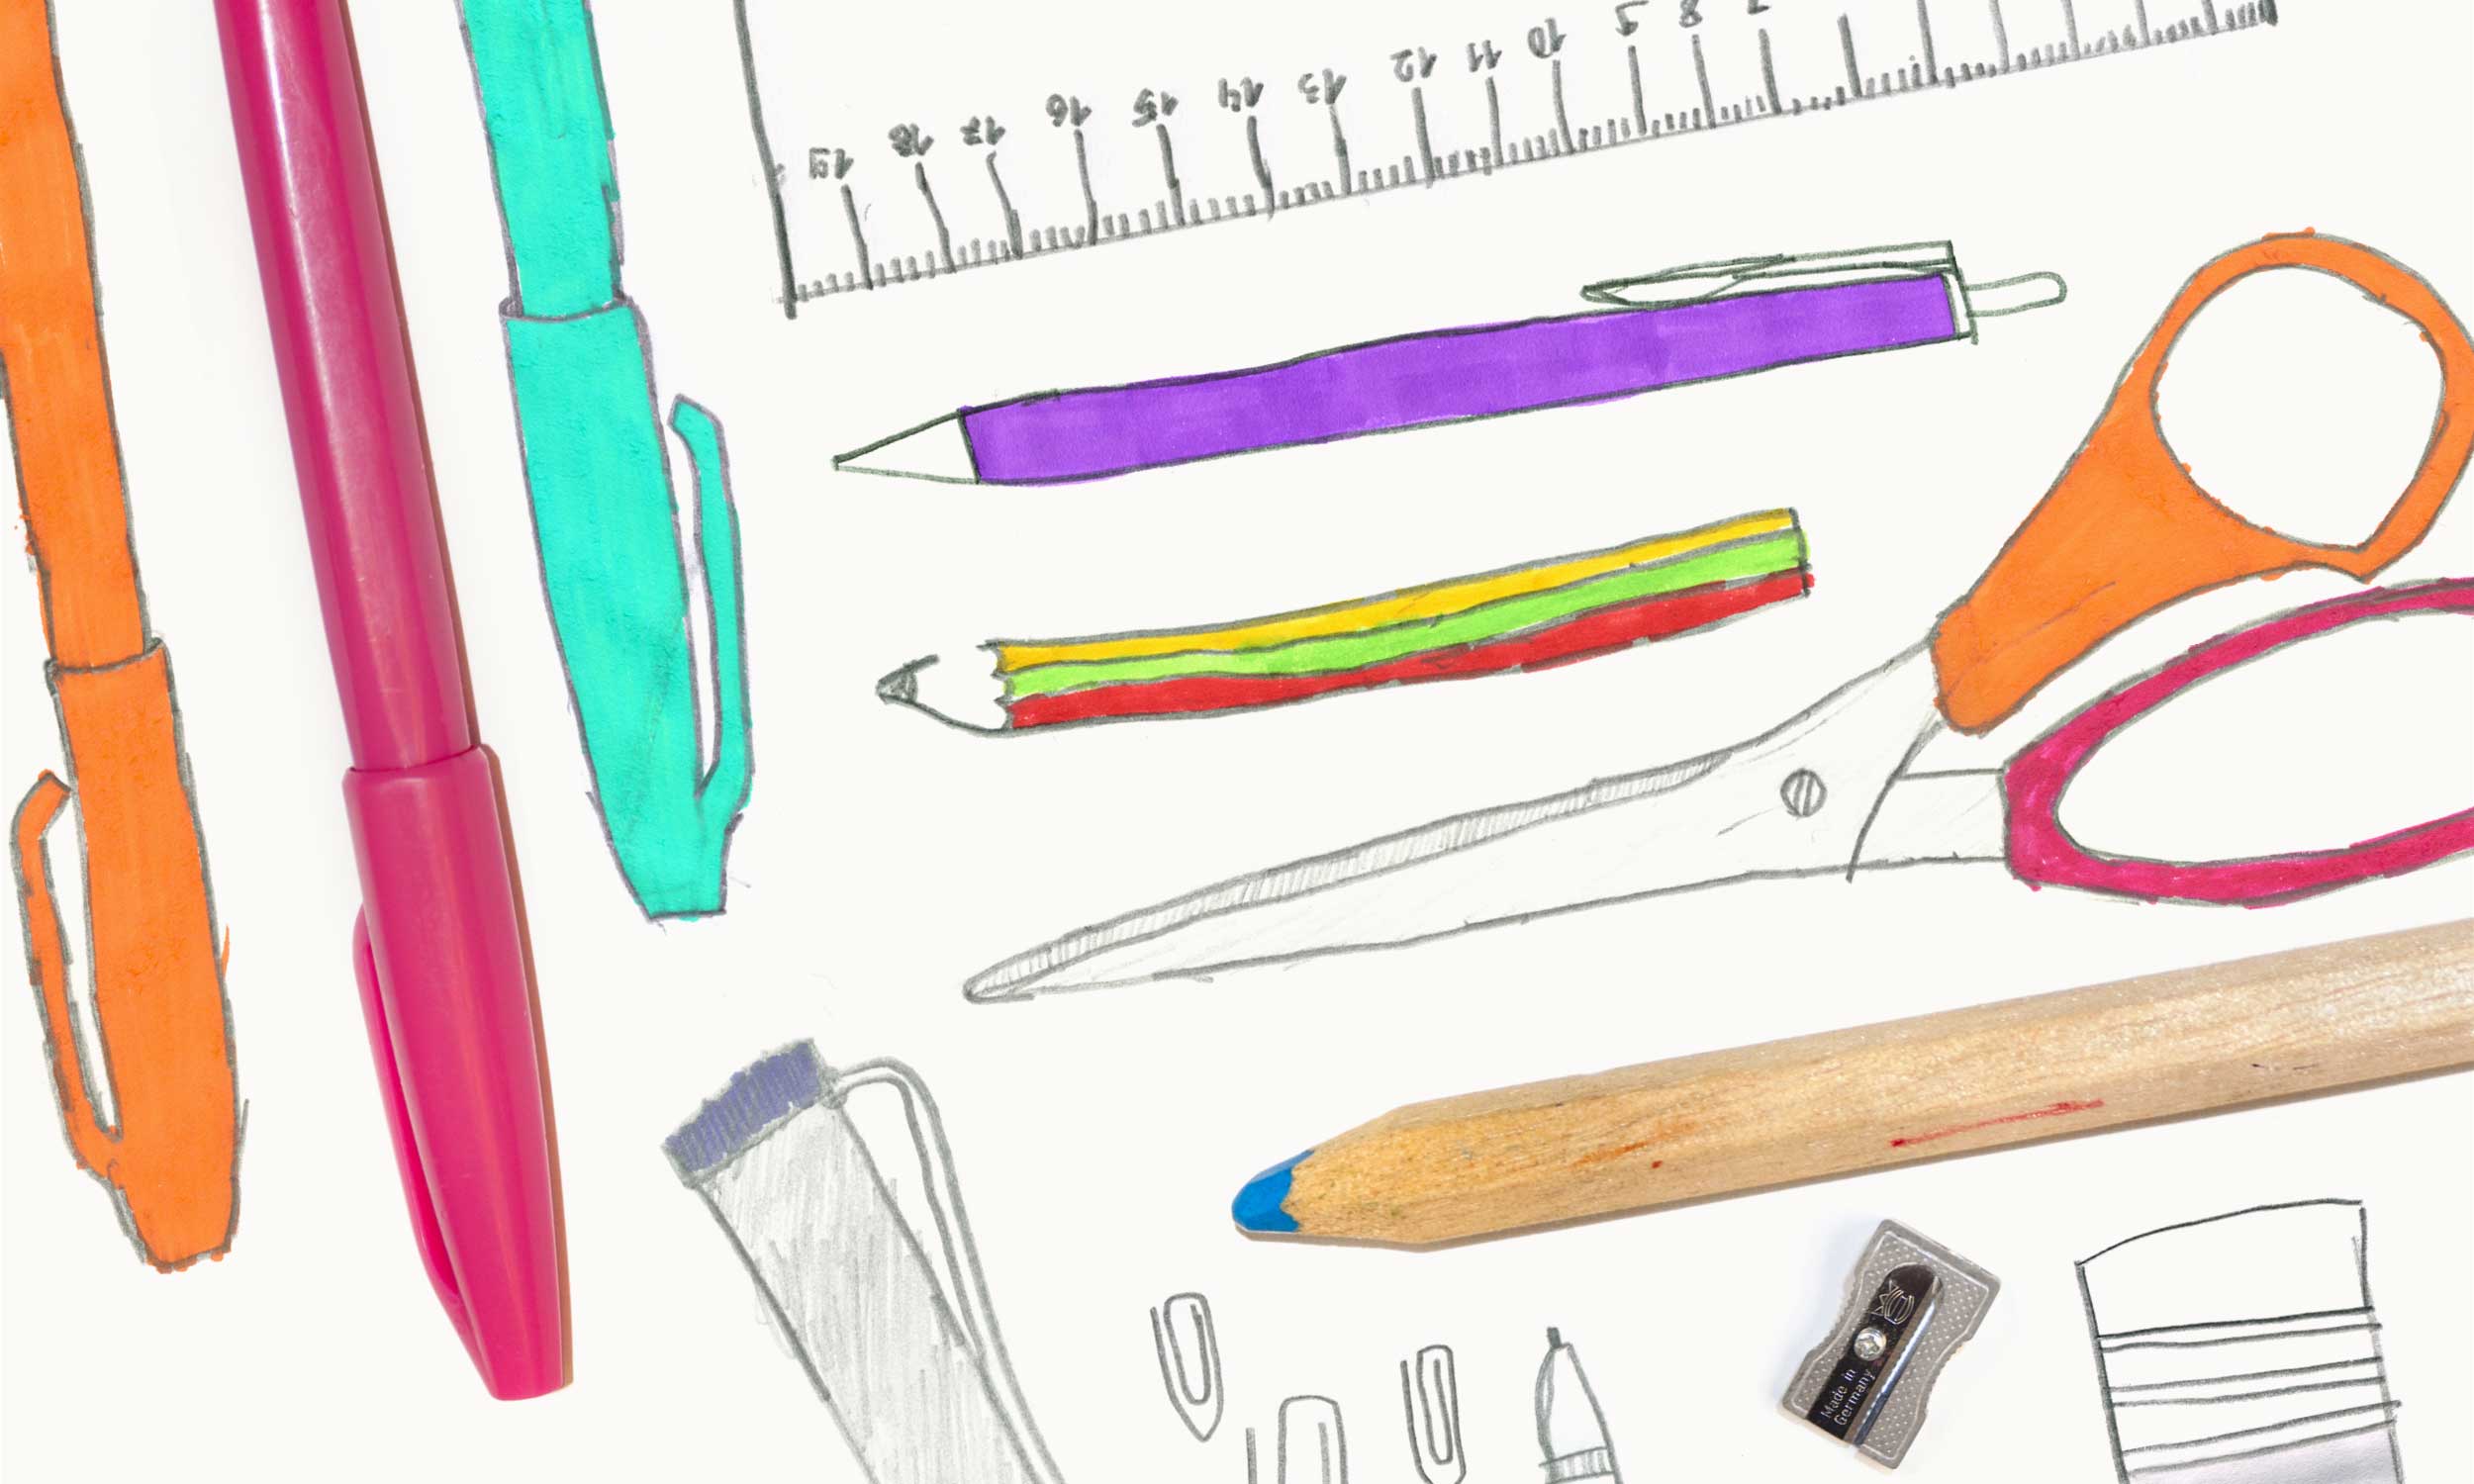 In the background, a detailed coloured child's drawing of various working tools, such as pens, scissors, ruler; on top, a thick wooden crayon.